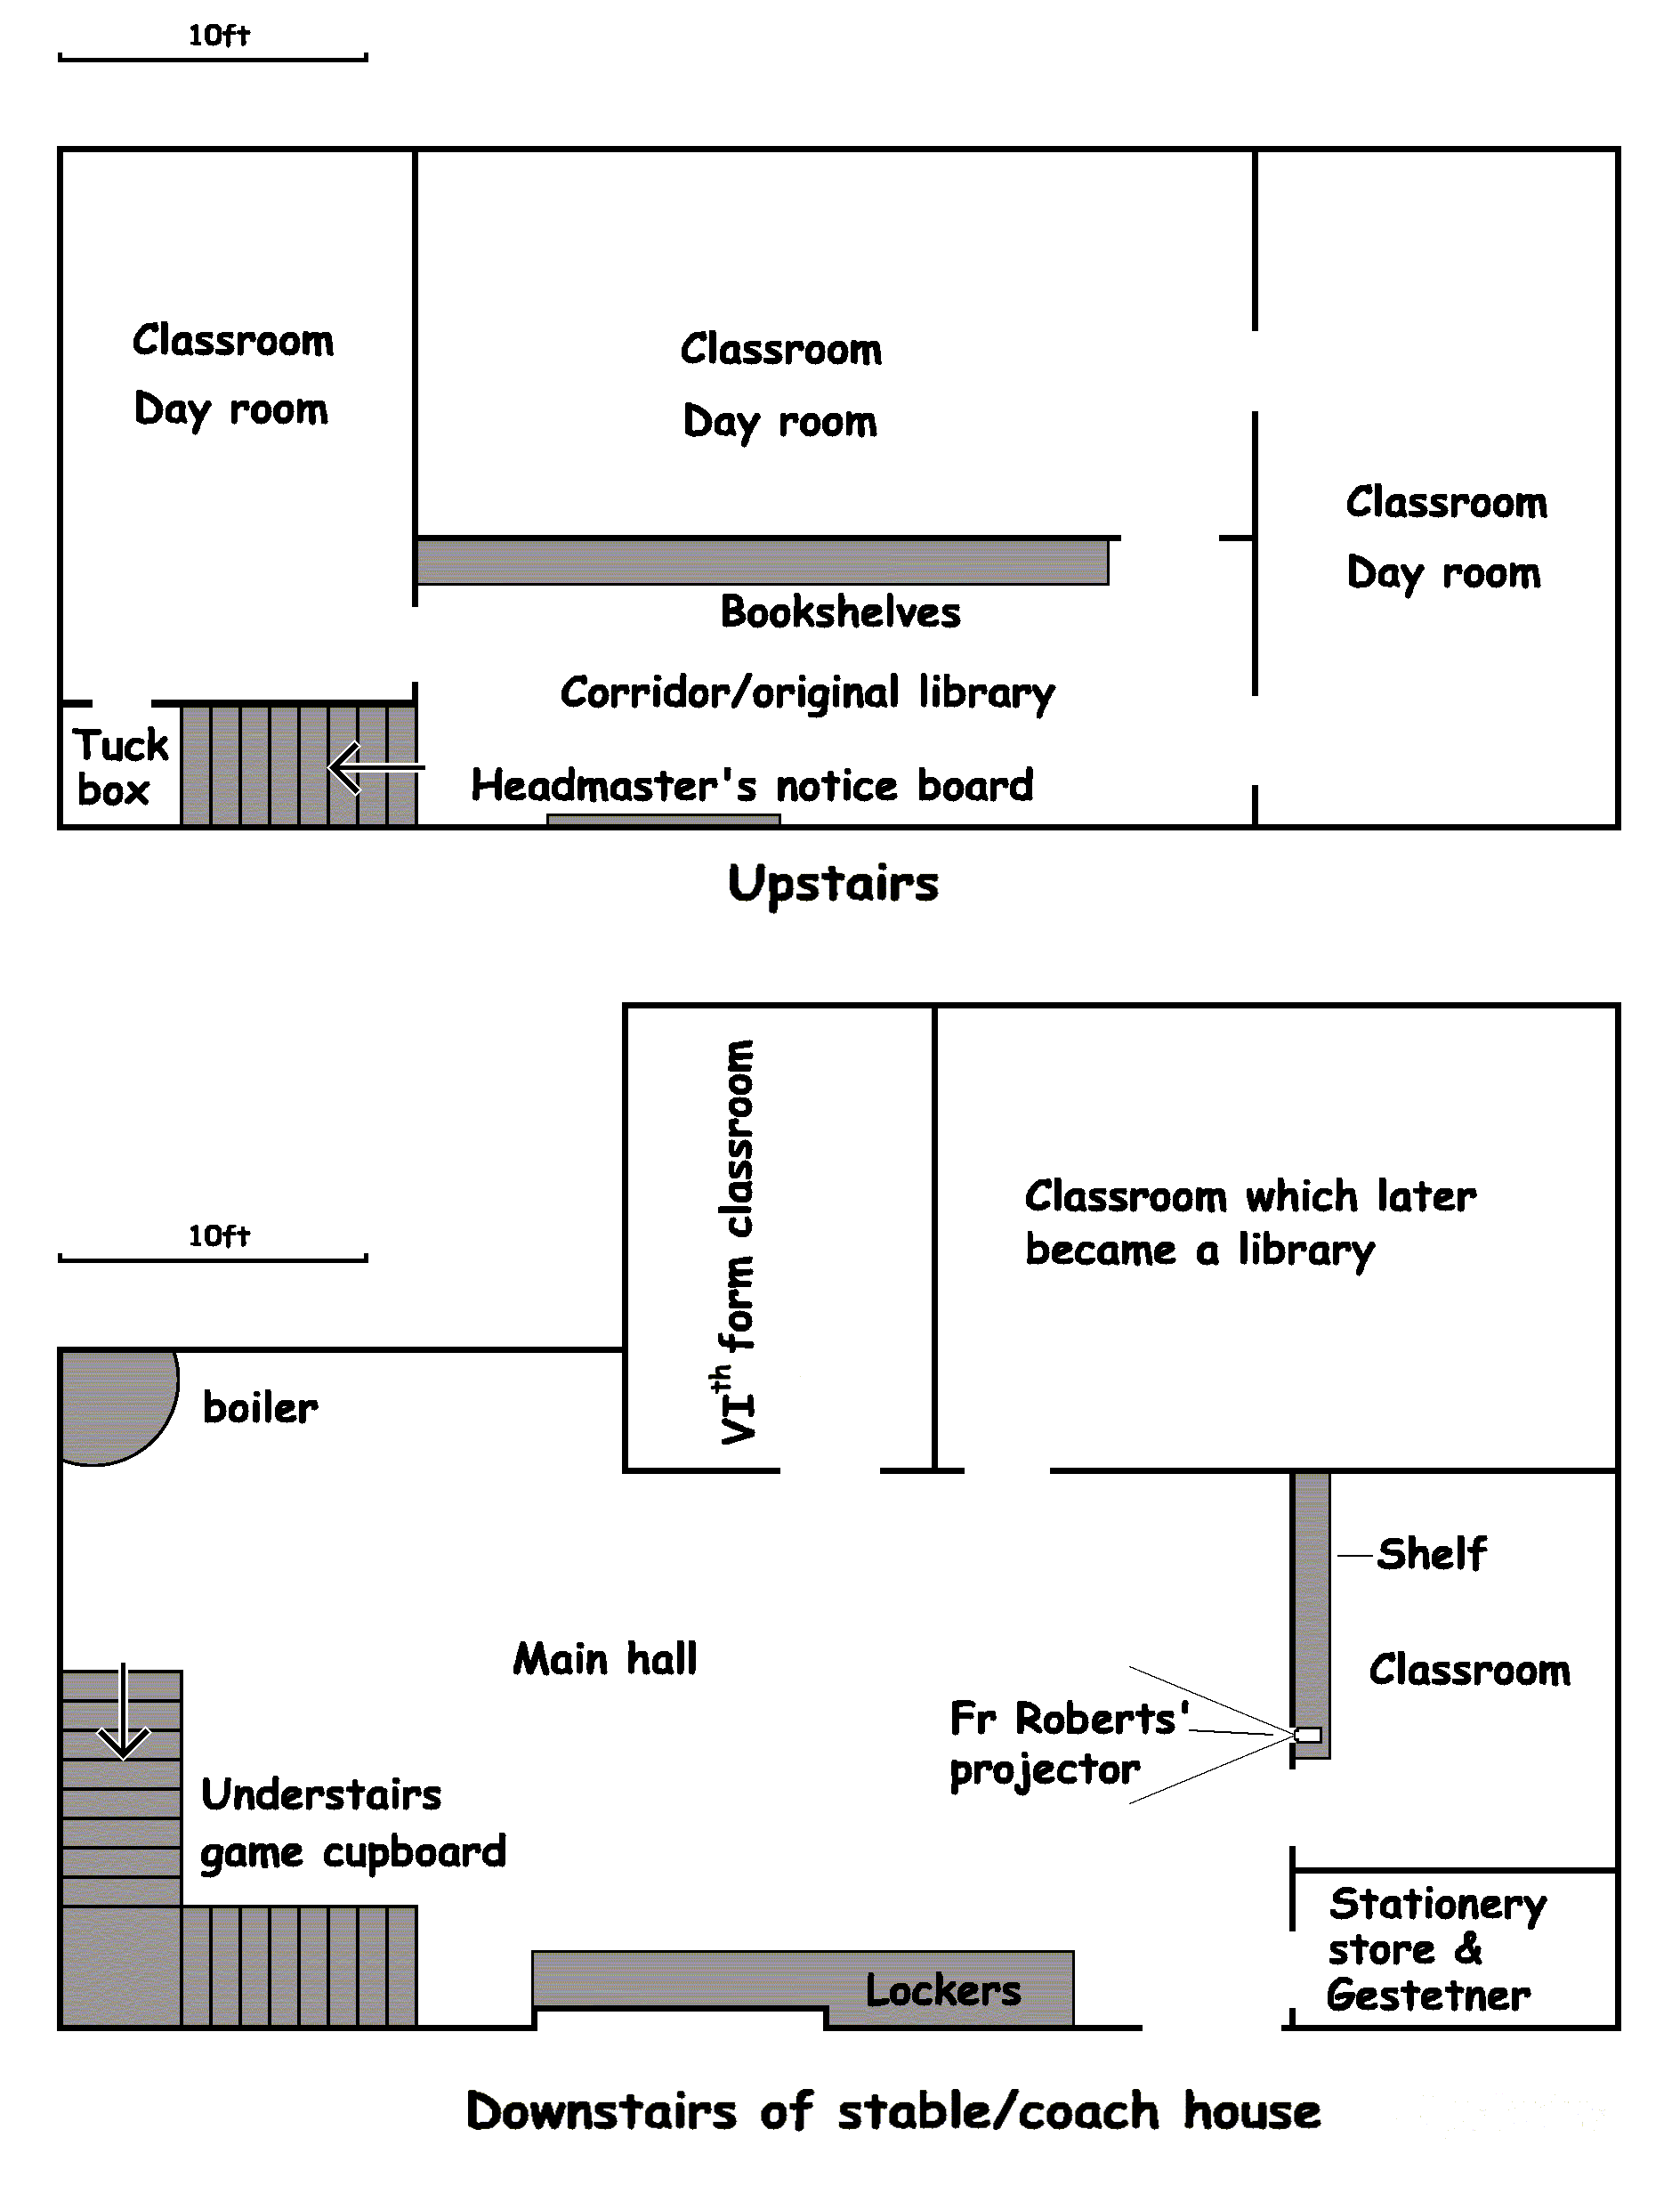 plan showing the arrangement of the classrooms in the stable block